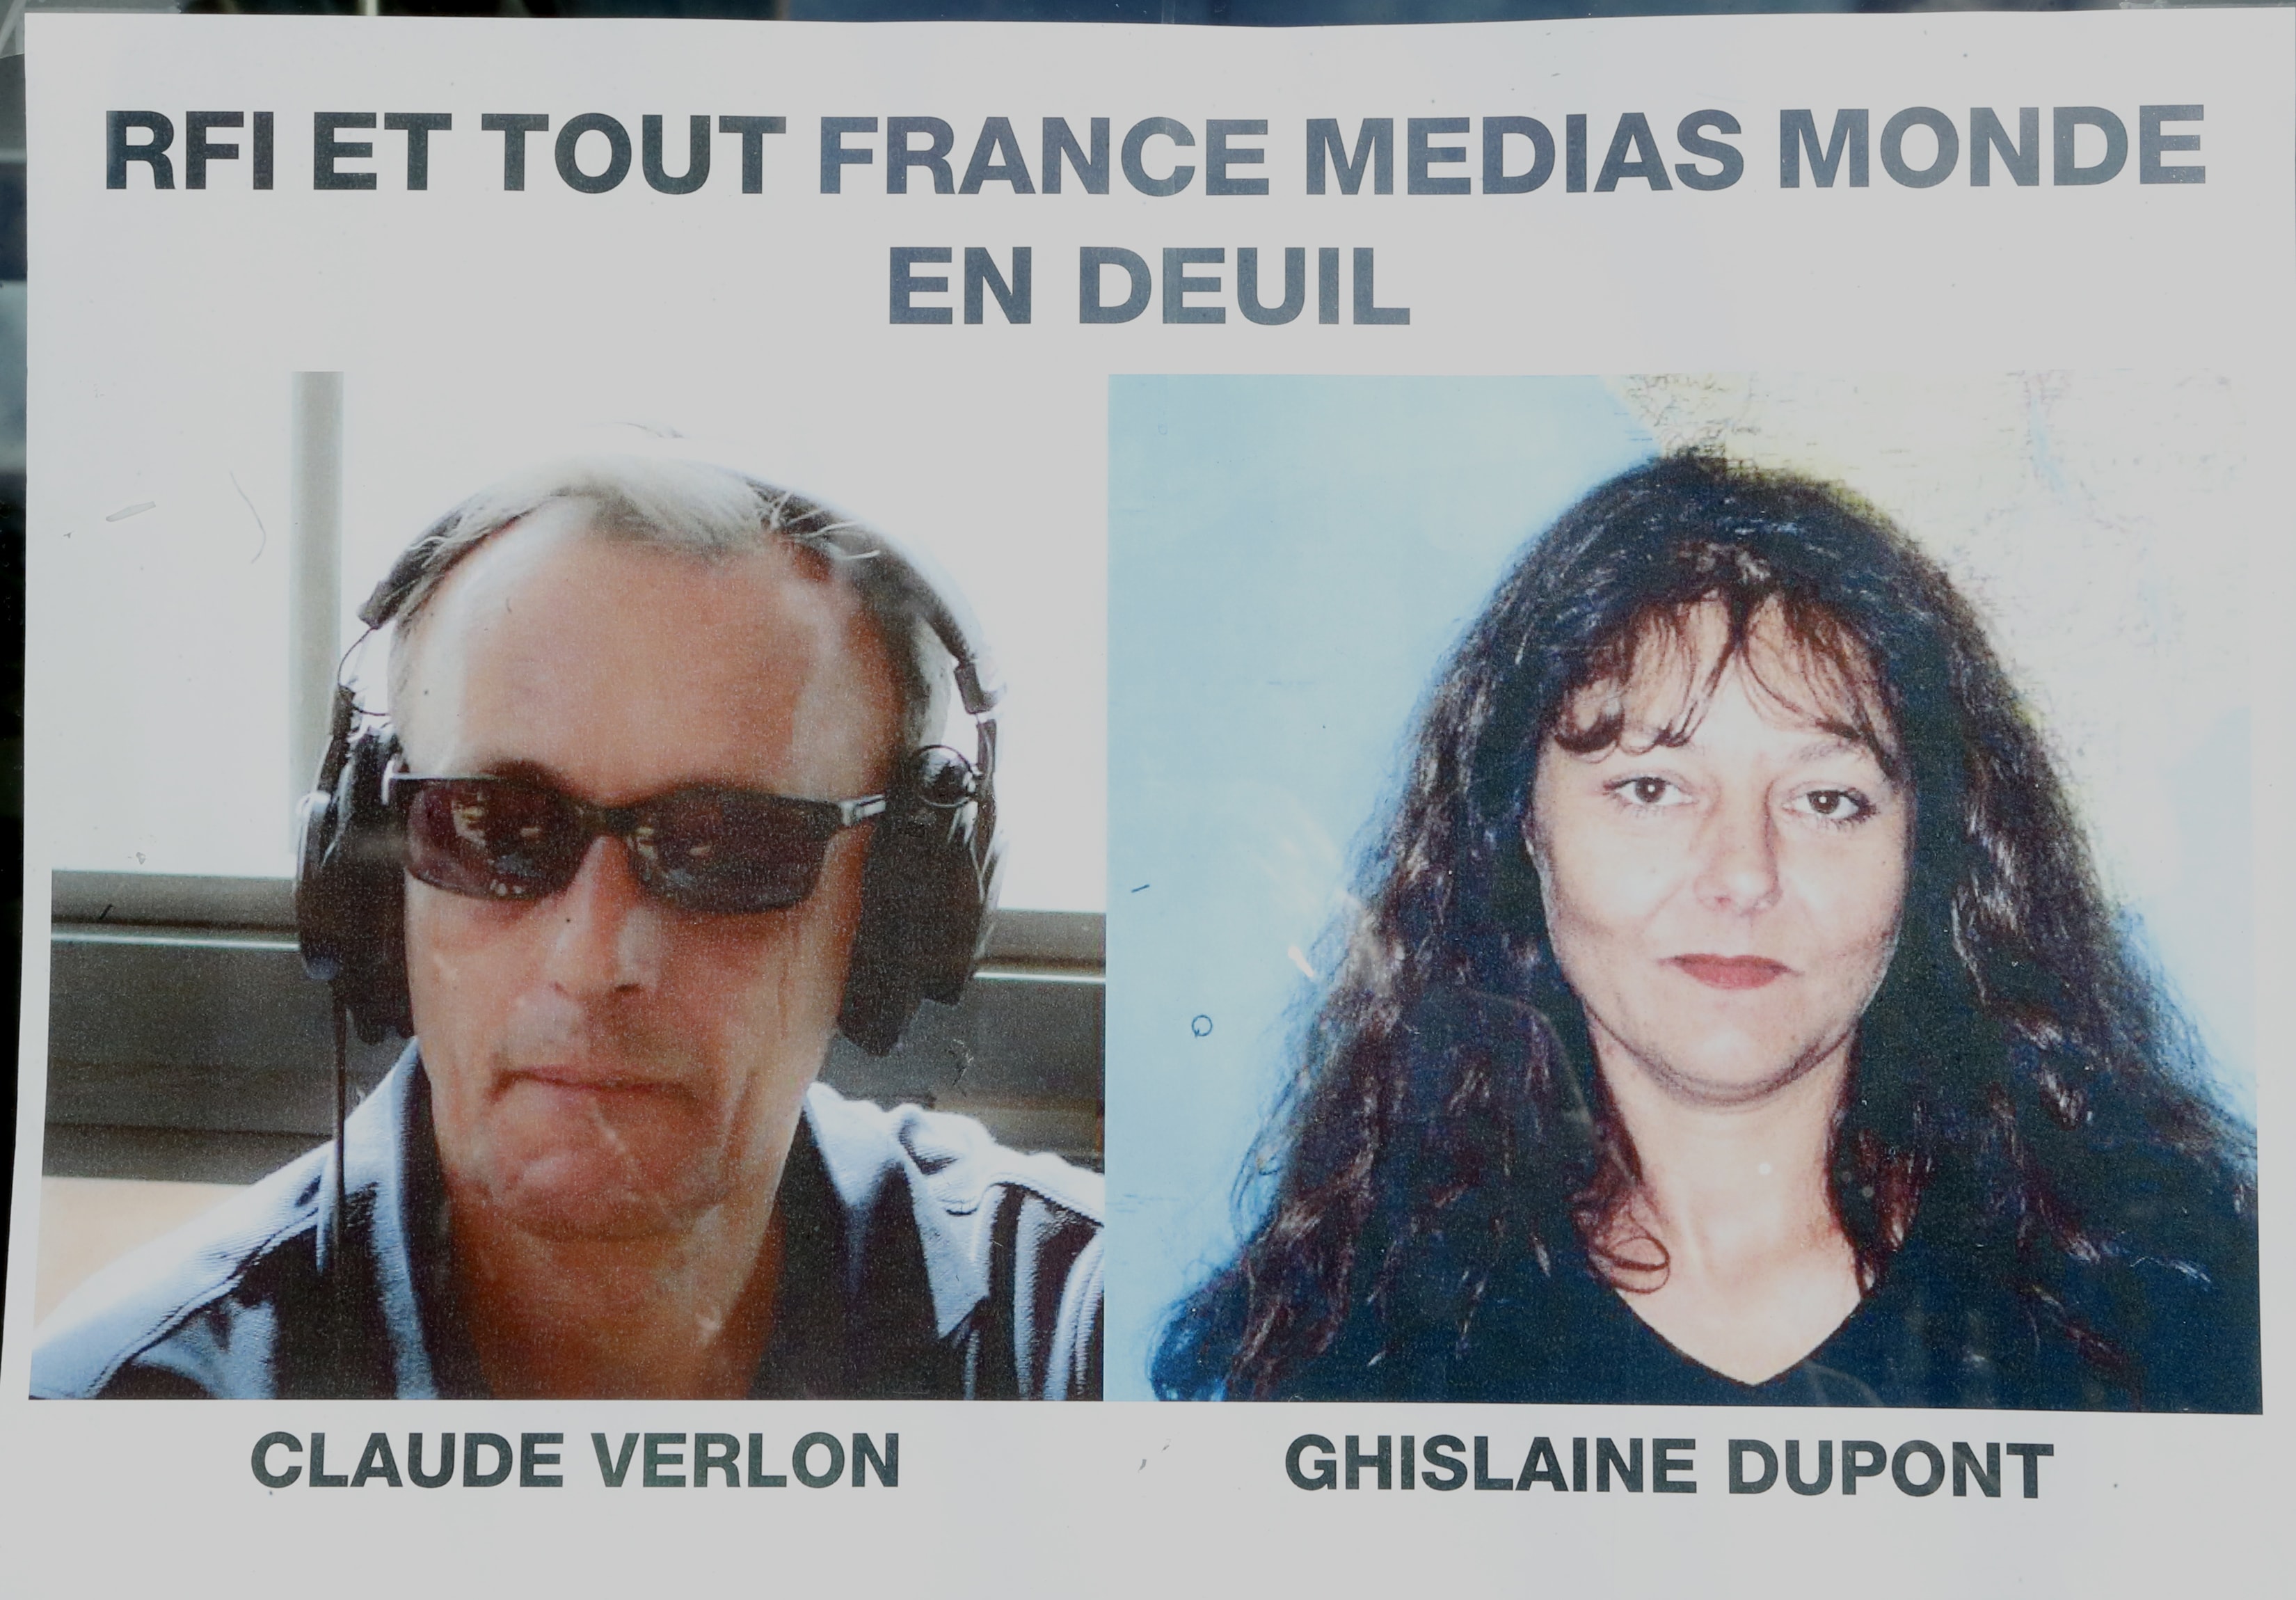 Pictures of Ghislaine Dupont, right, and Claude Verlon are displayed on a poster in Paris, 3 November 2013., AP Photo/Jacques Brinon